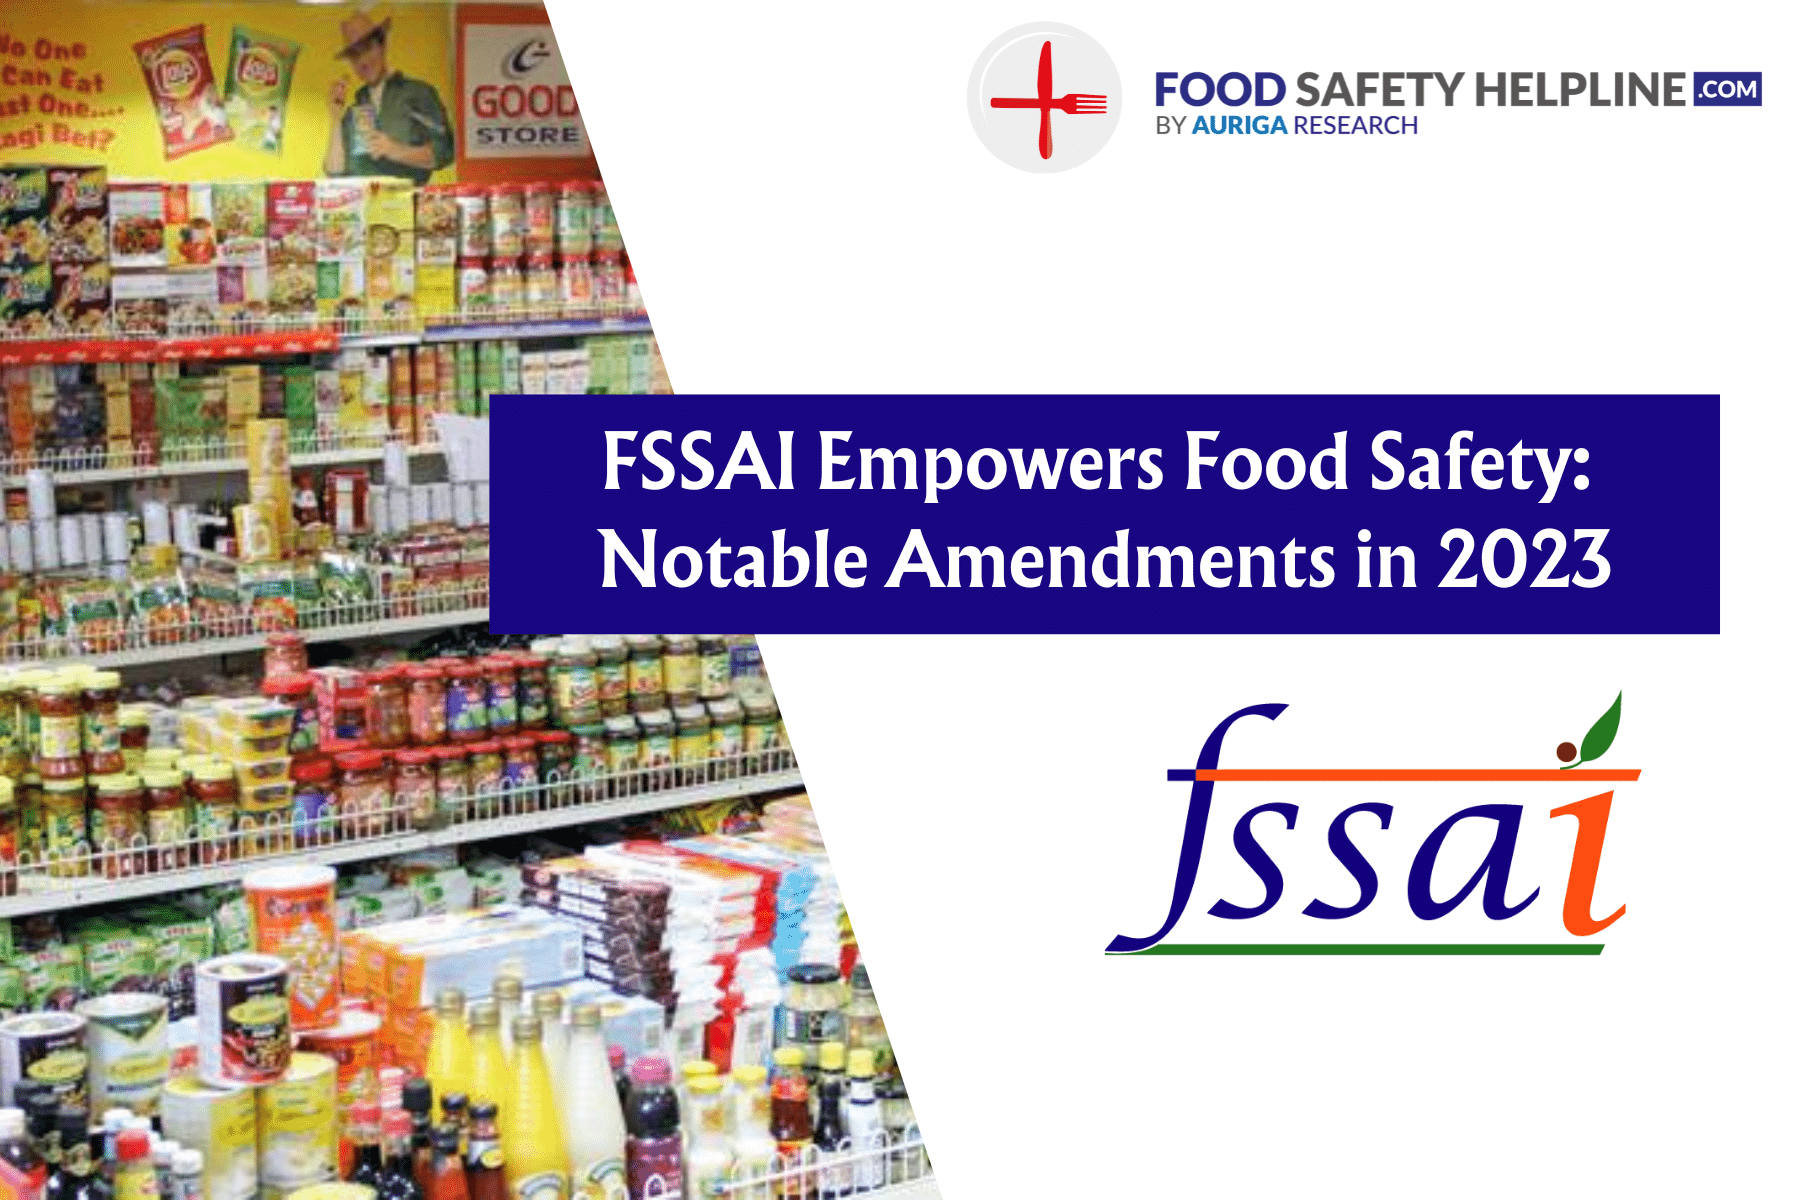 FSSAI Empowers Food Safety: Notable Amendments in 2023